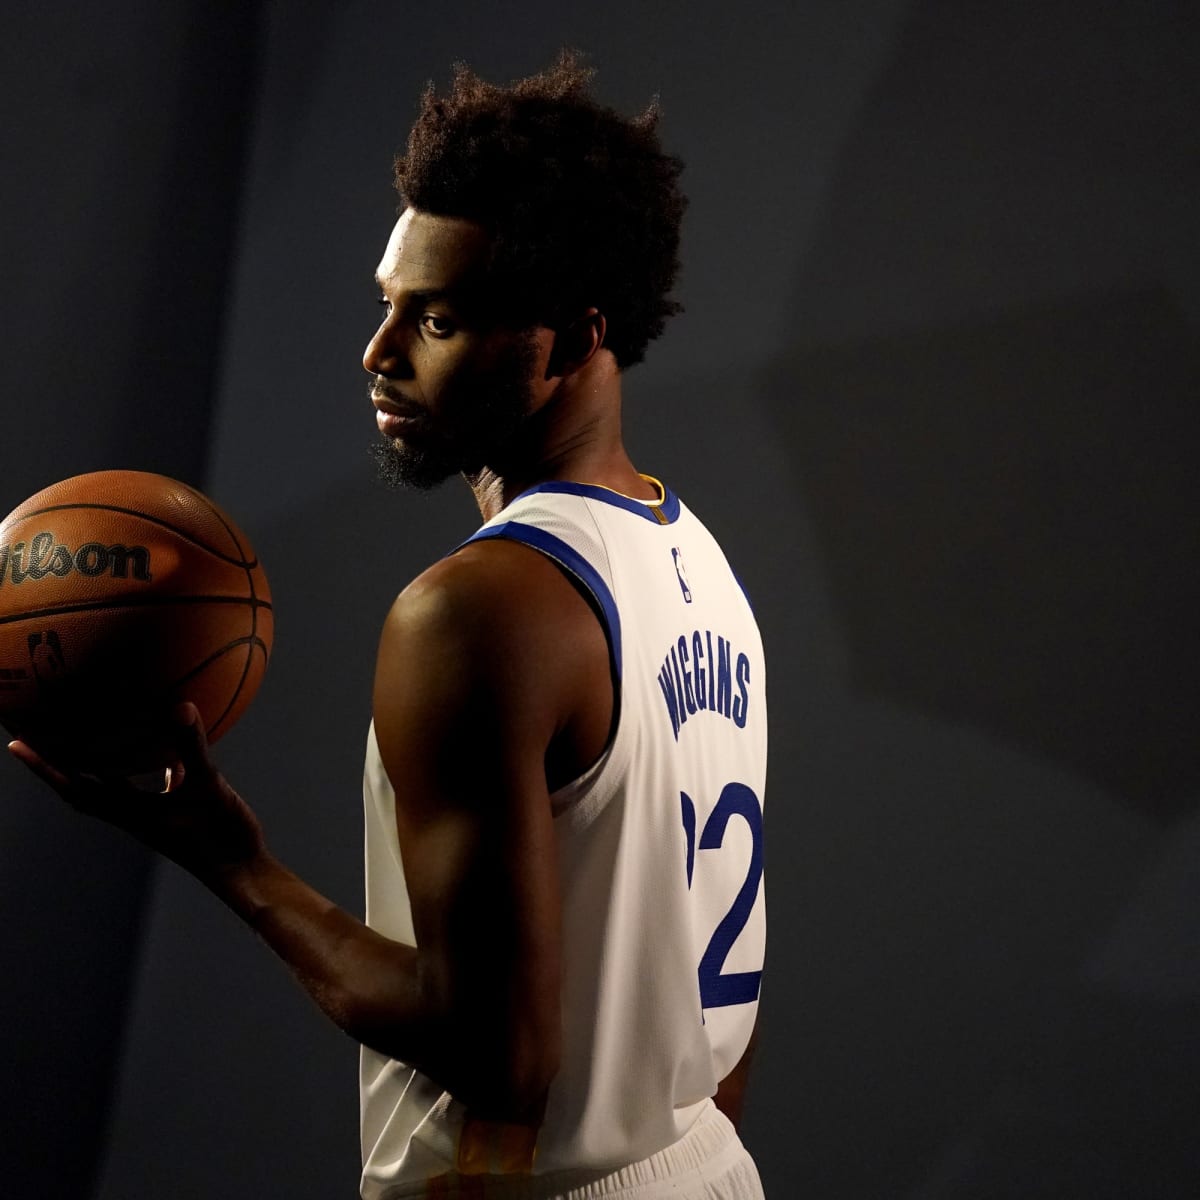 Golden State Warriors' Andrew Wiggins 'forever grateful' for team support  during absence